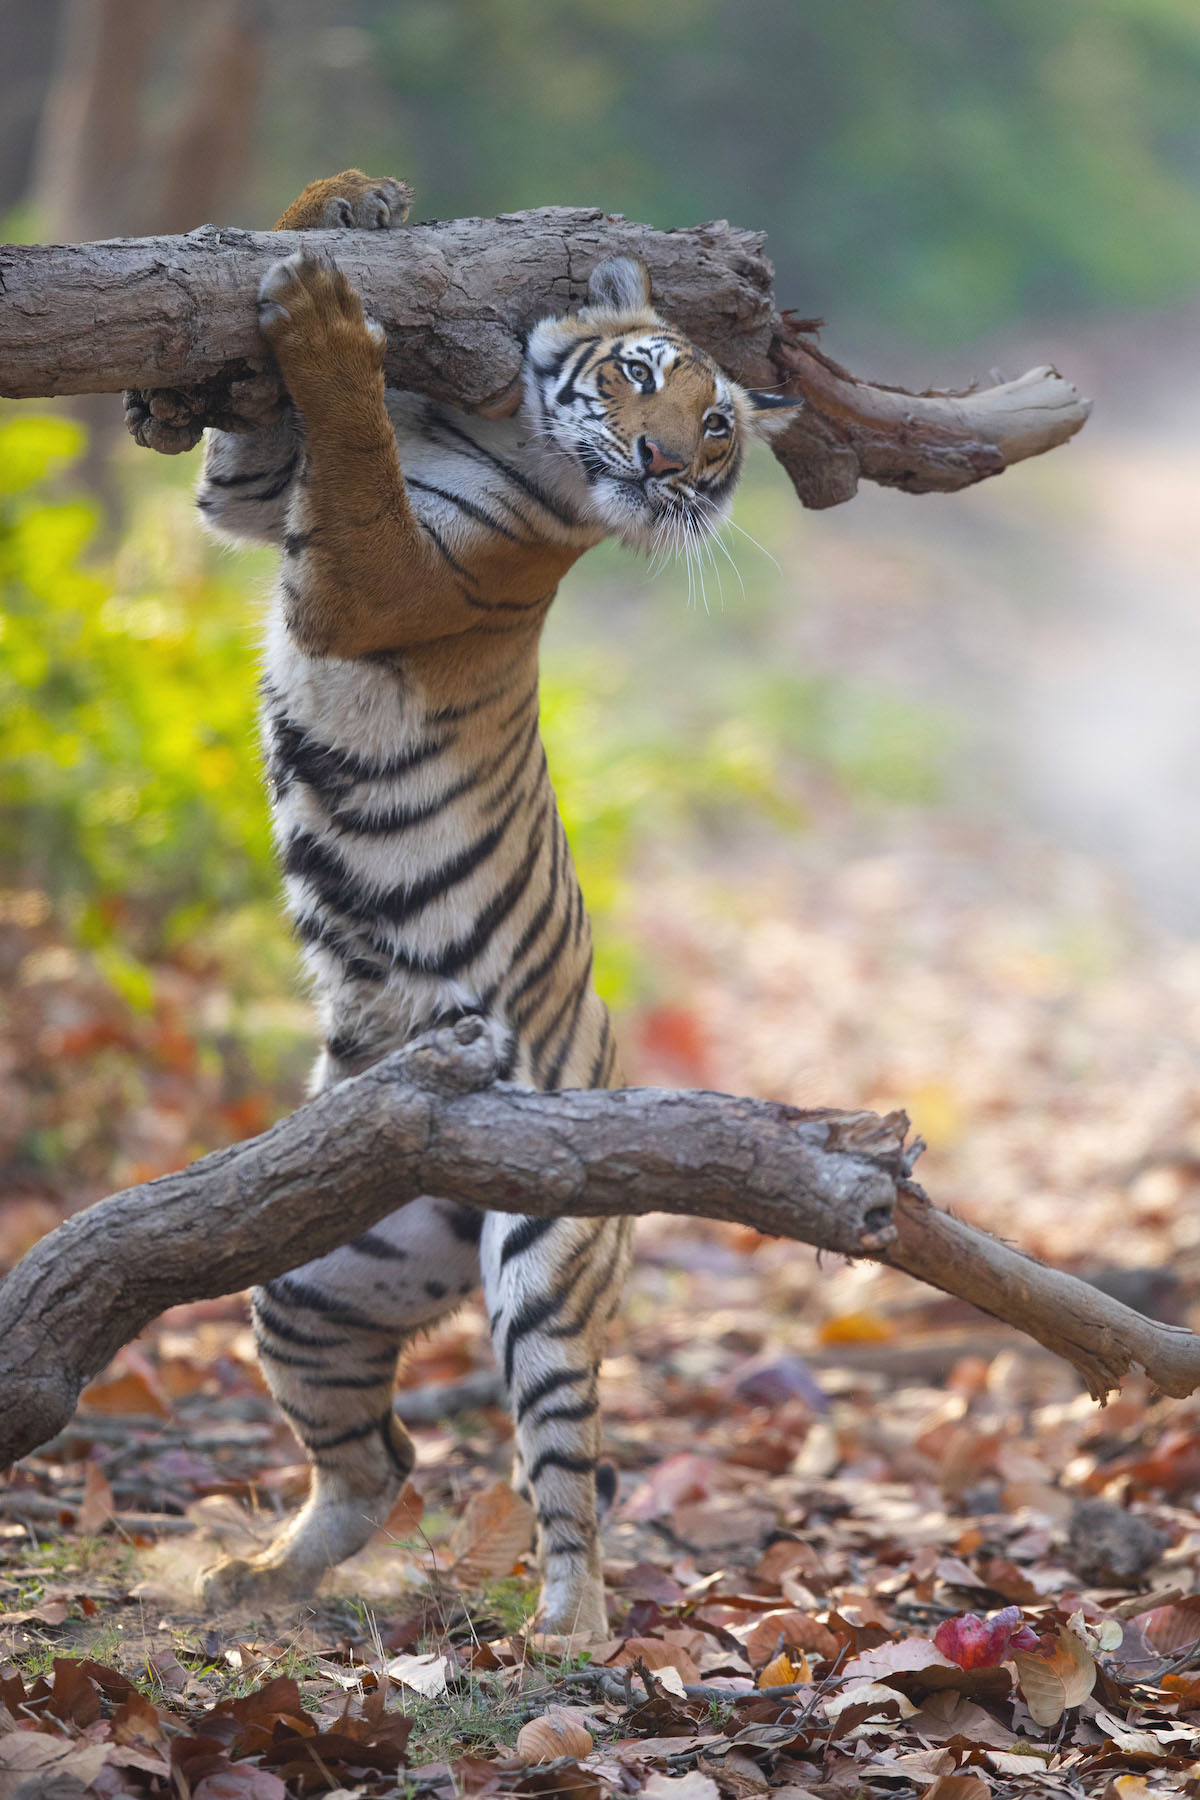 Female Tiger Looking Like She's Carrying a Log